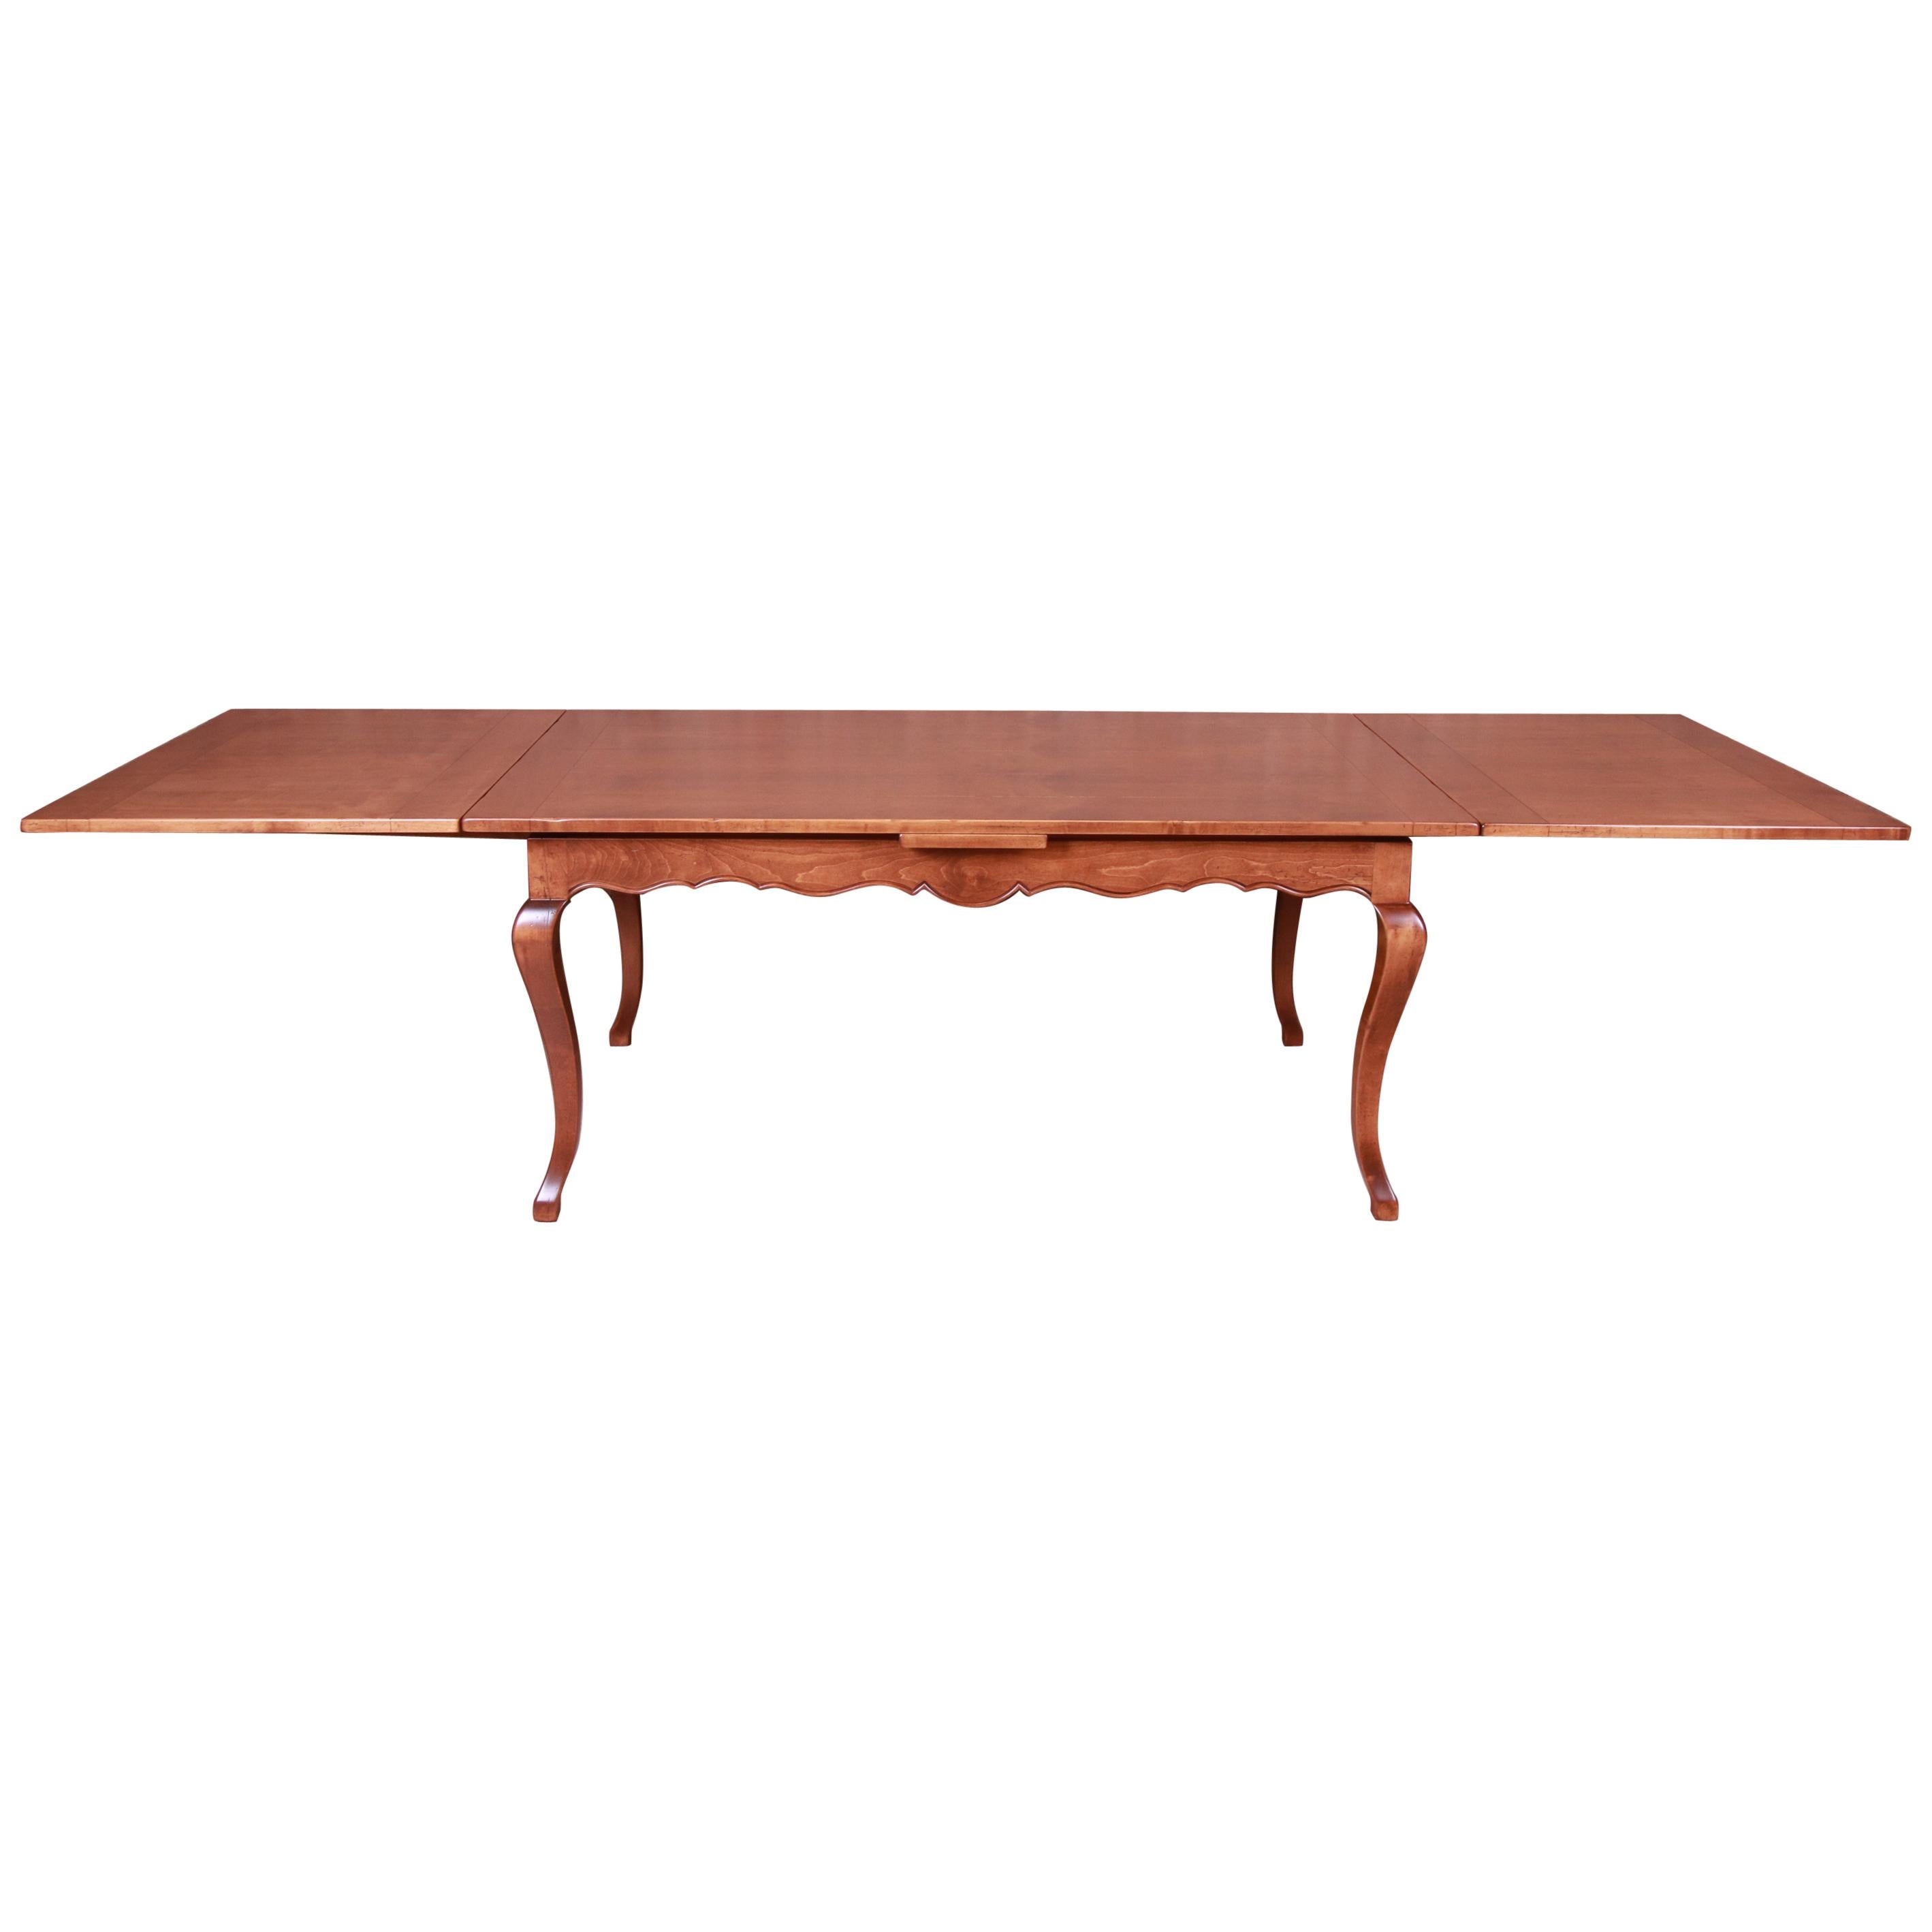 Baker Furniture French Country Harvest Farm Table, Newly Restored